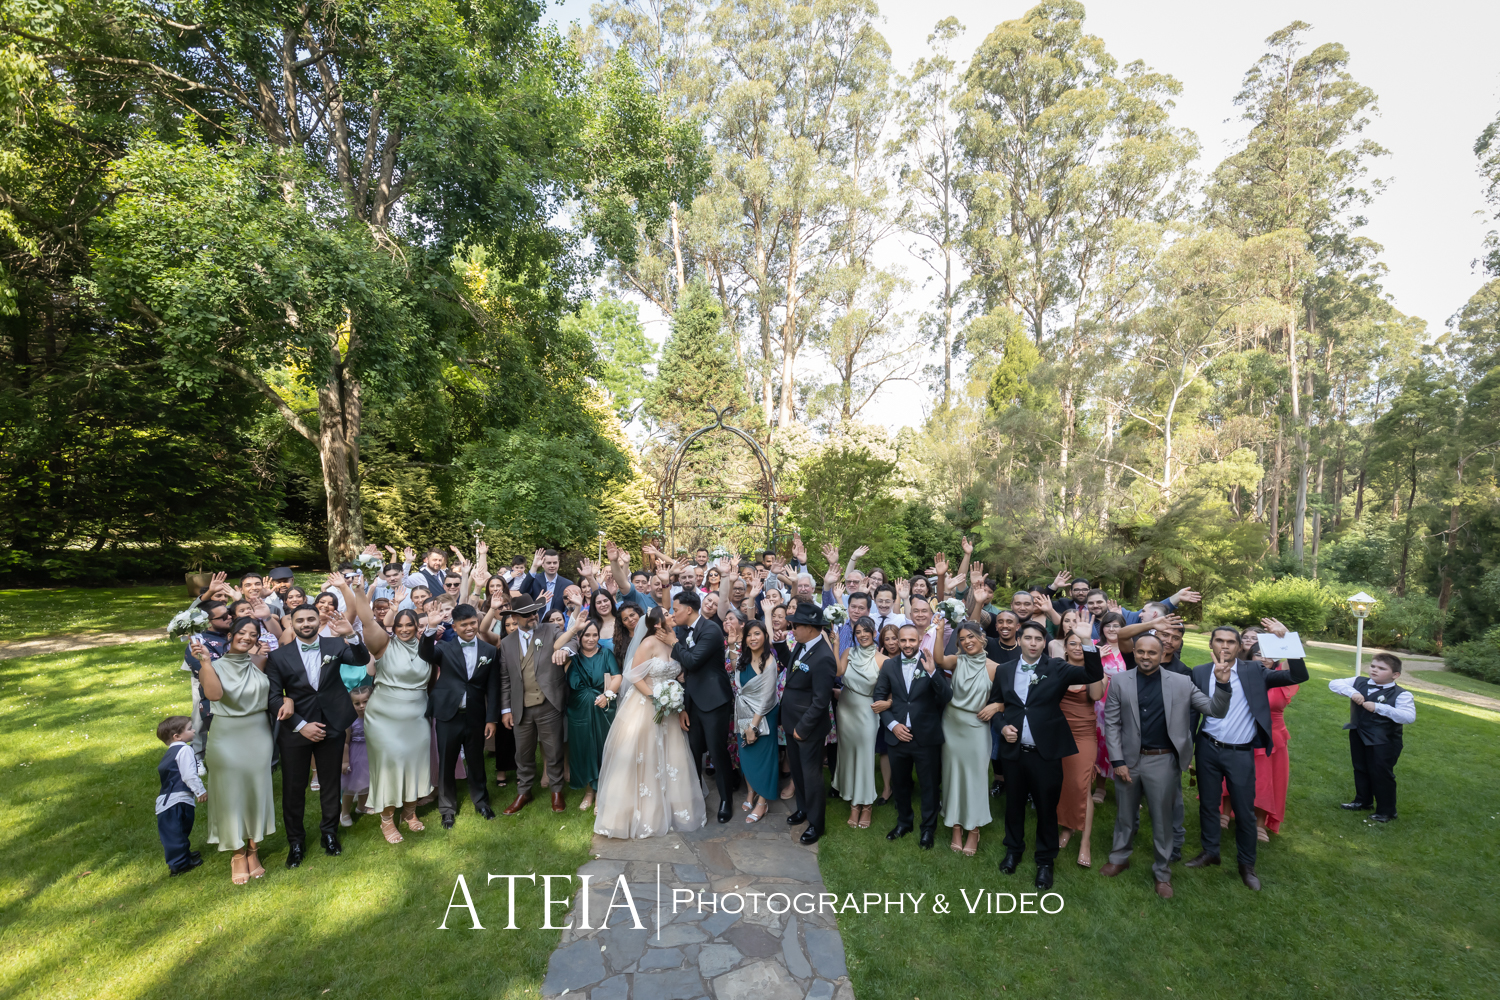 , Ysabel and Clint&#8217;s wedding photography at Tatra Receptions captured by ATEIA Photography &#038; Video